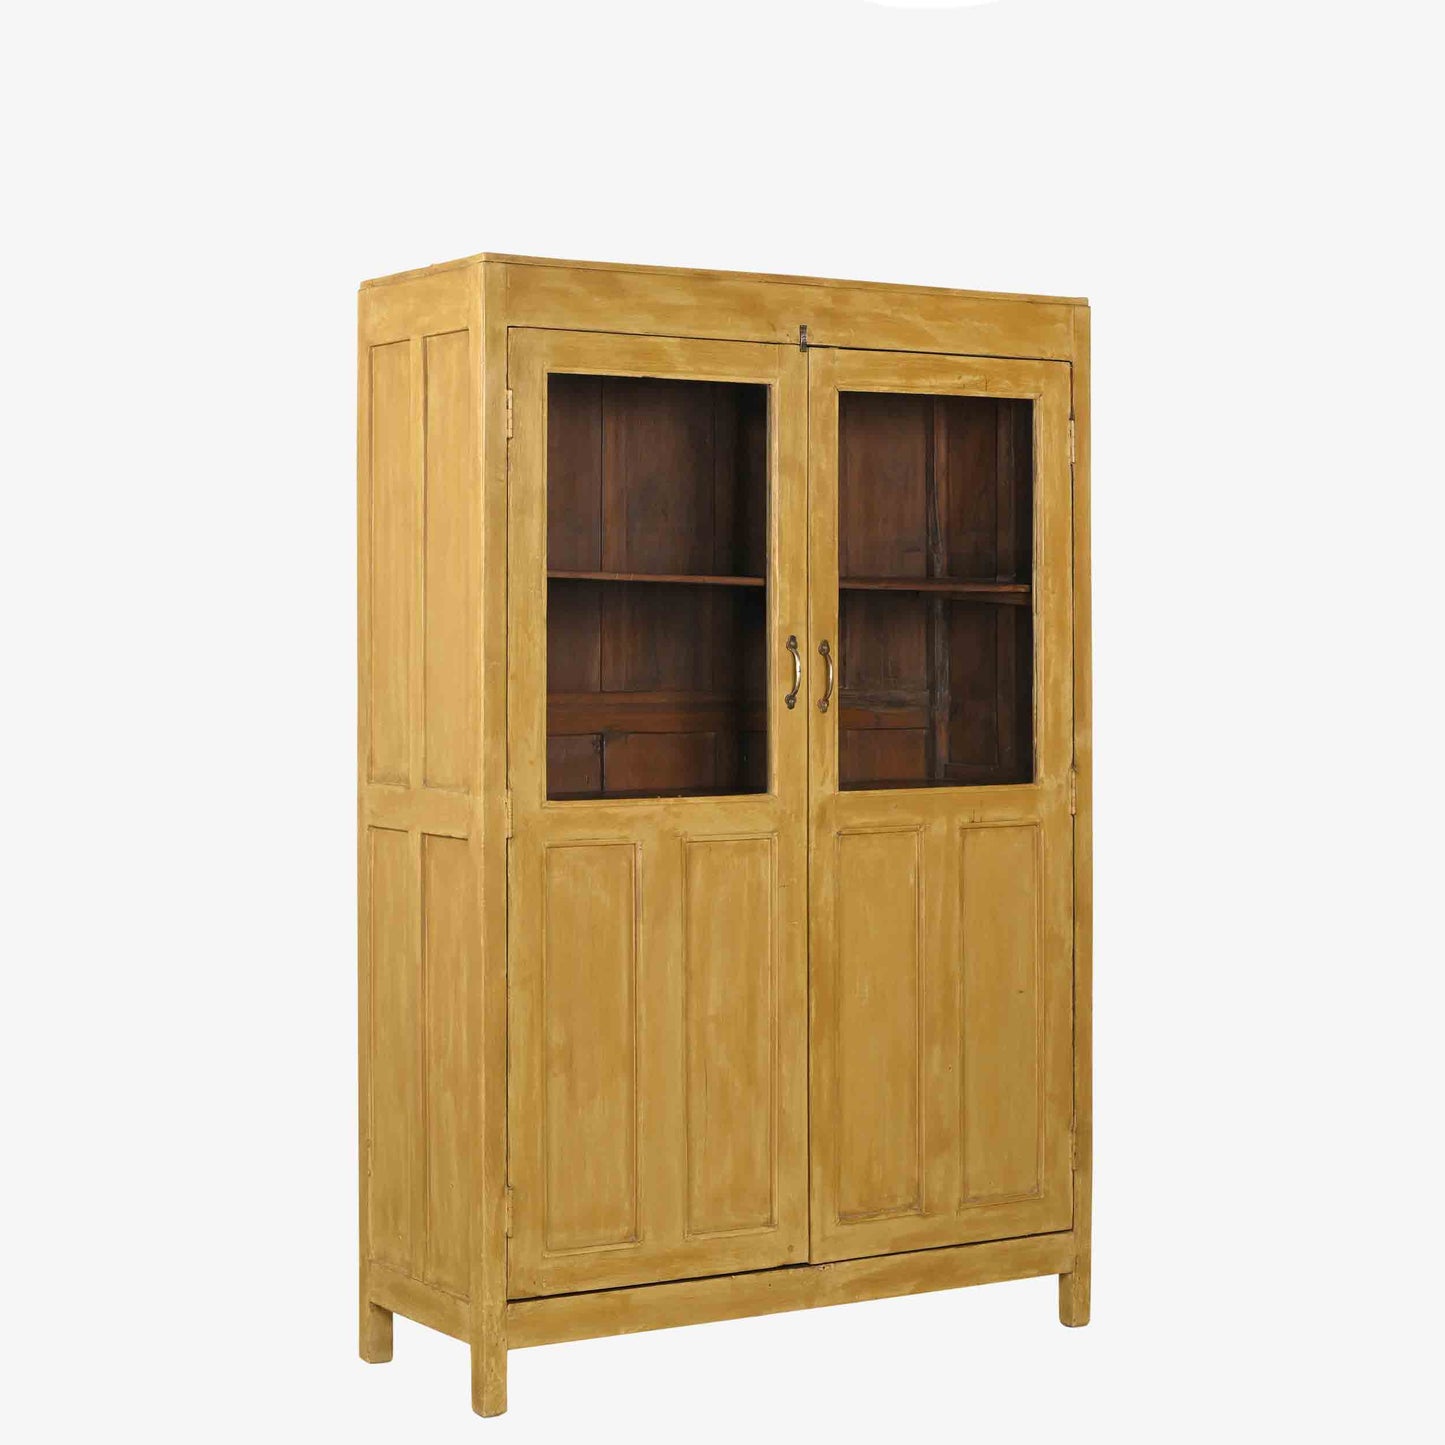 The Byrne Antique Display Dresser in Field of Wheat Yellow